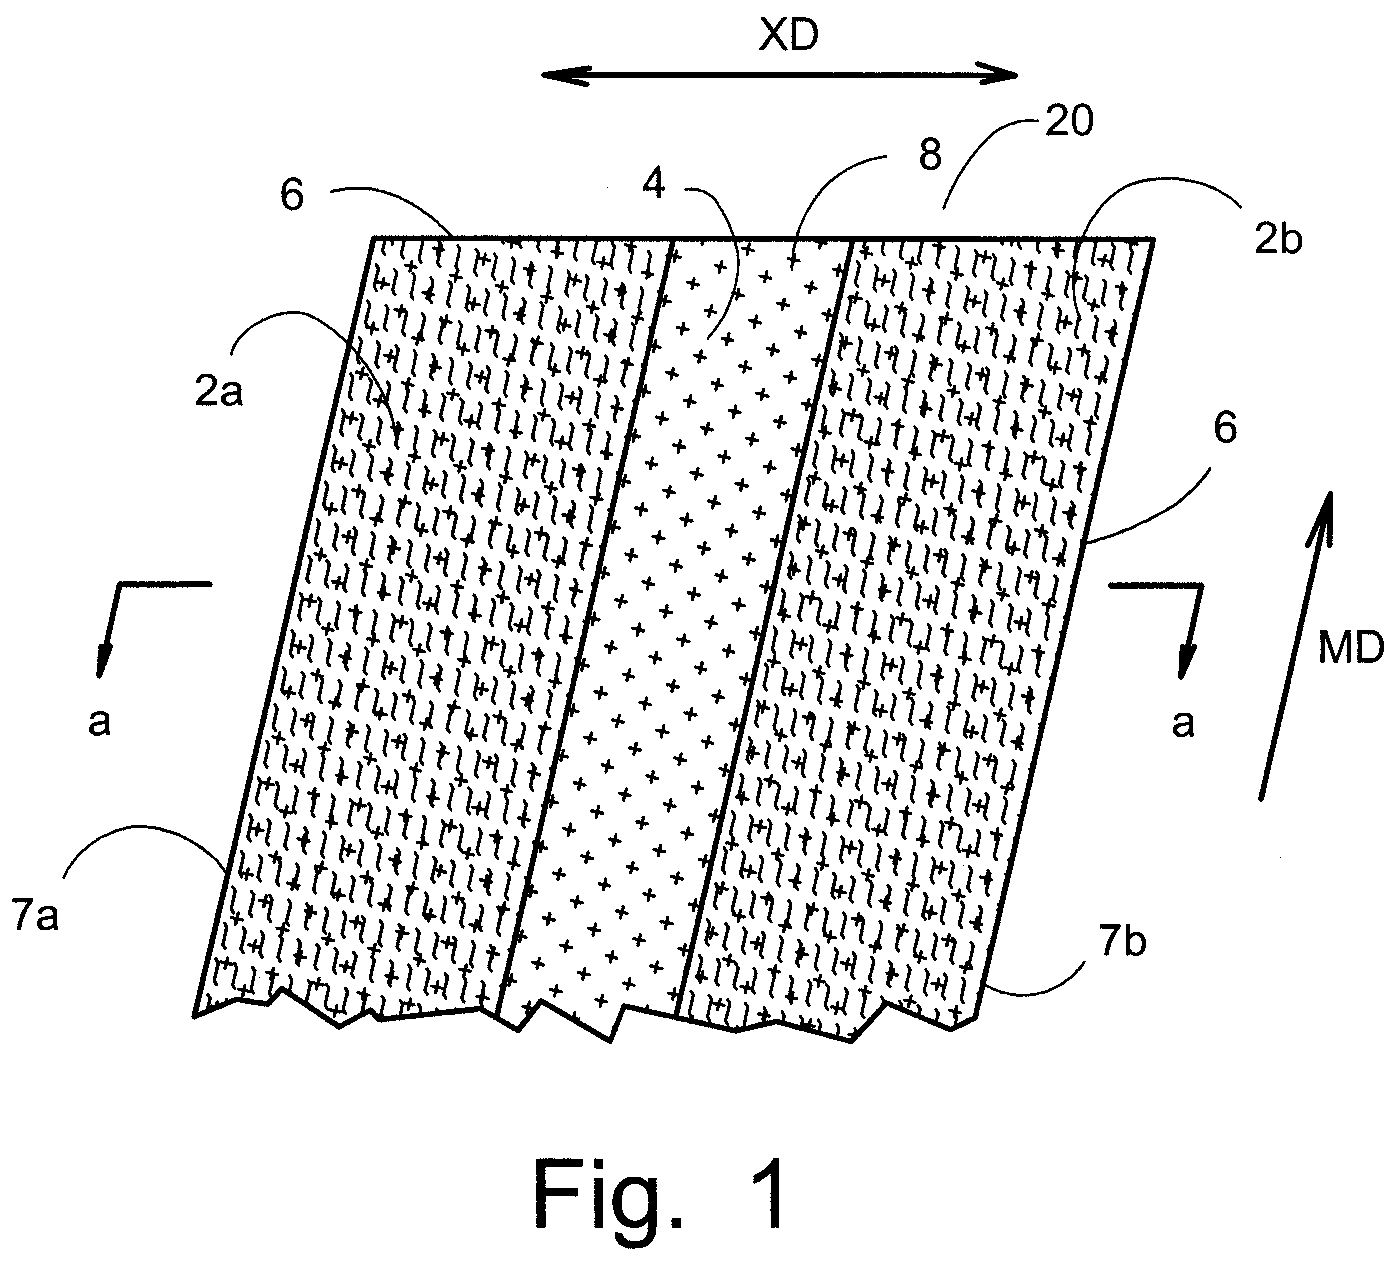 Stitchbonded fabric with a discontinuous substrate